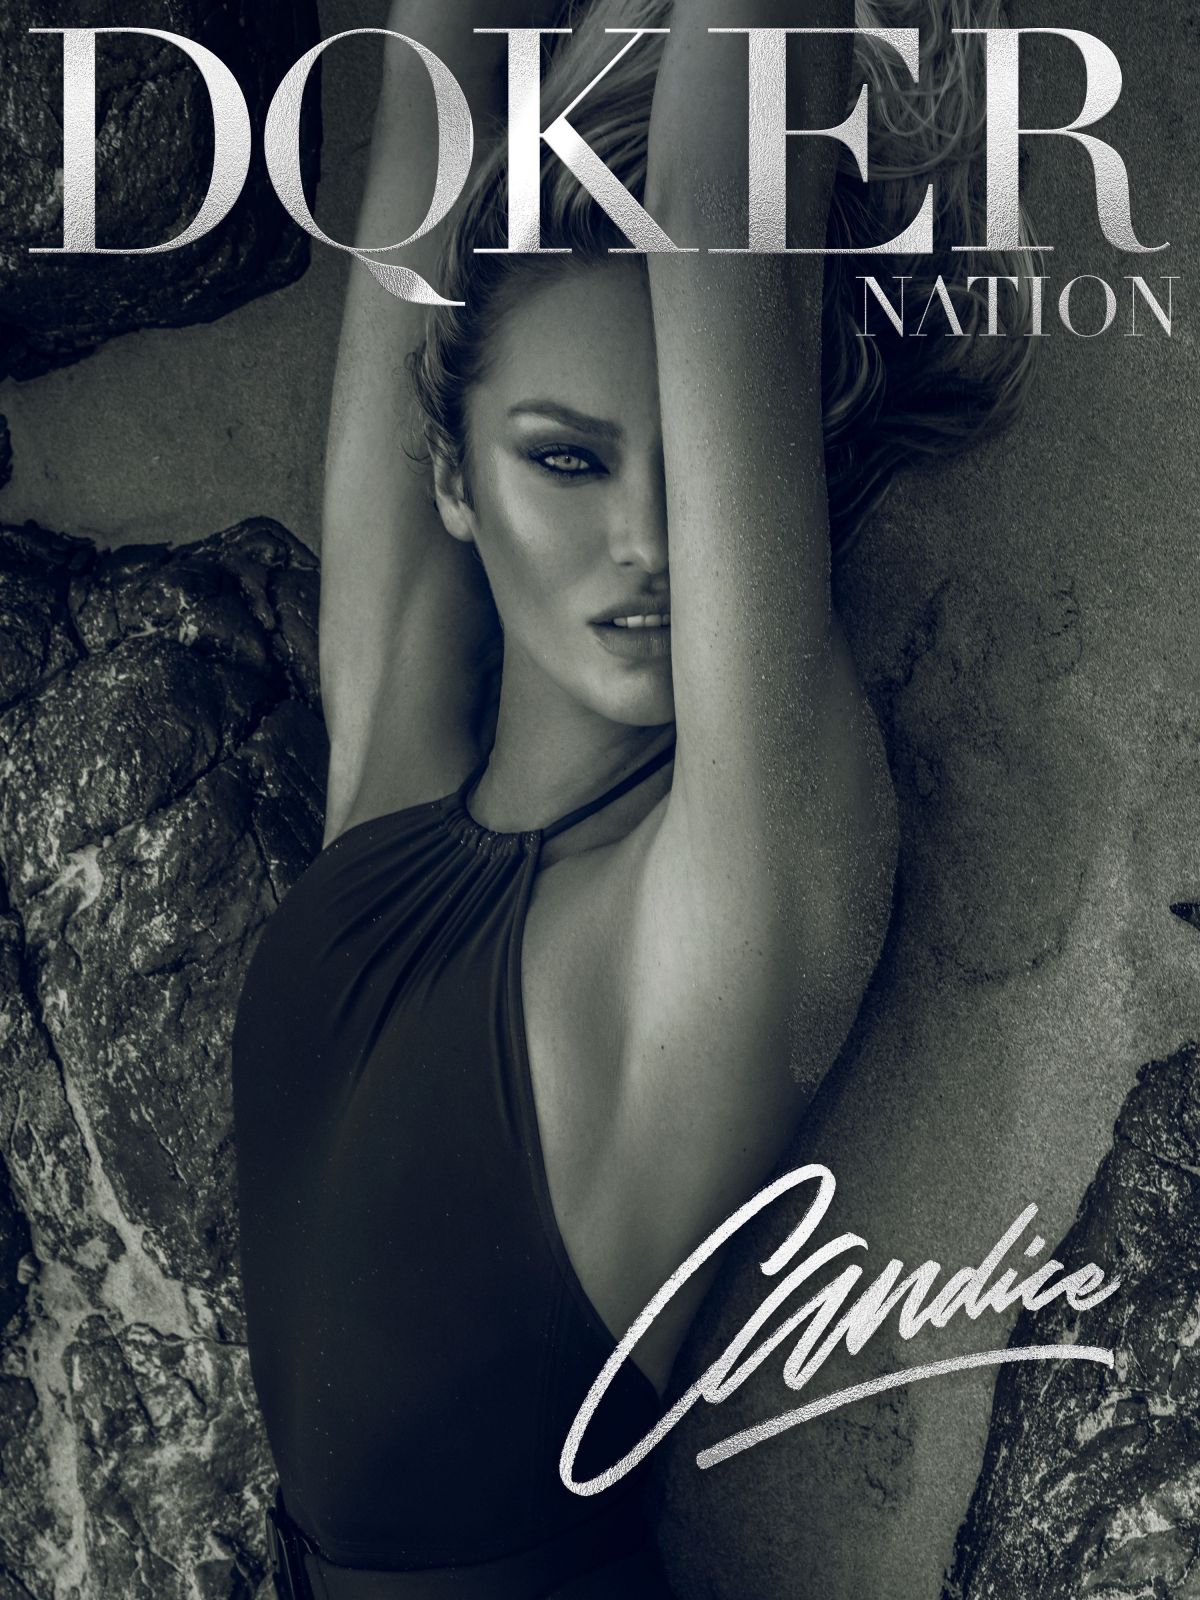 Candice Swanepoel for Dqker Nation, February 2018